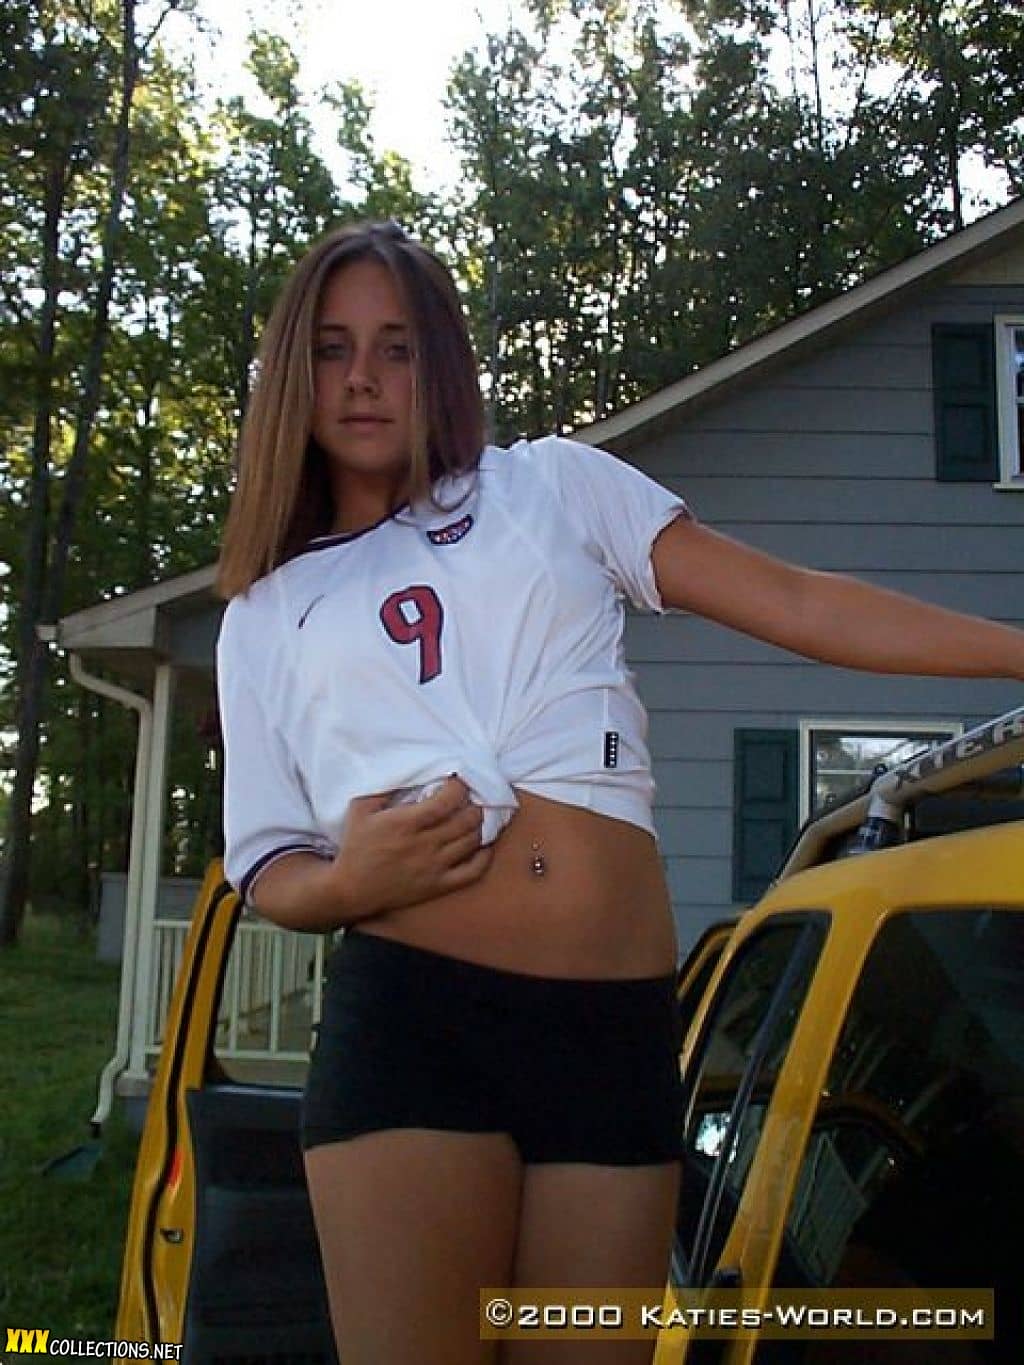 Hot early picture set with Katie from katies-world wearing a cute soccer ou...